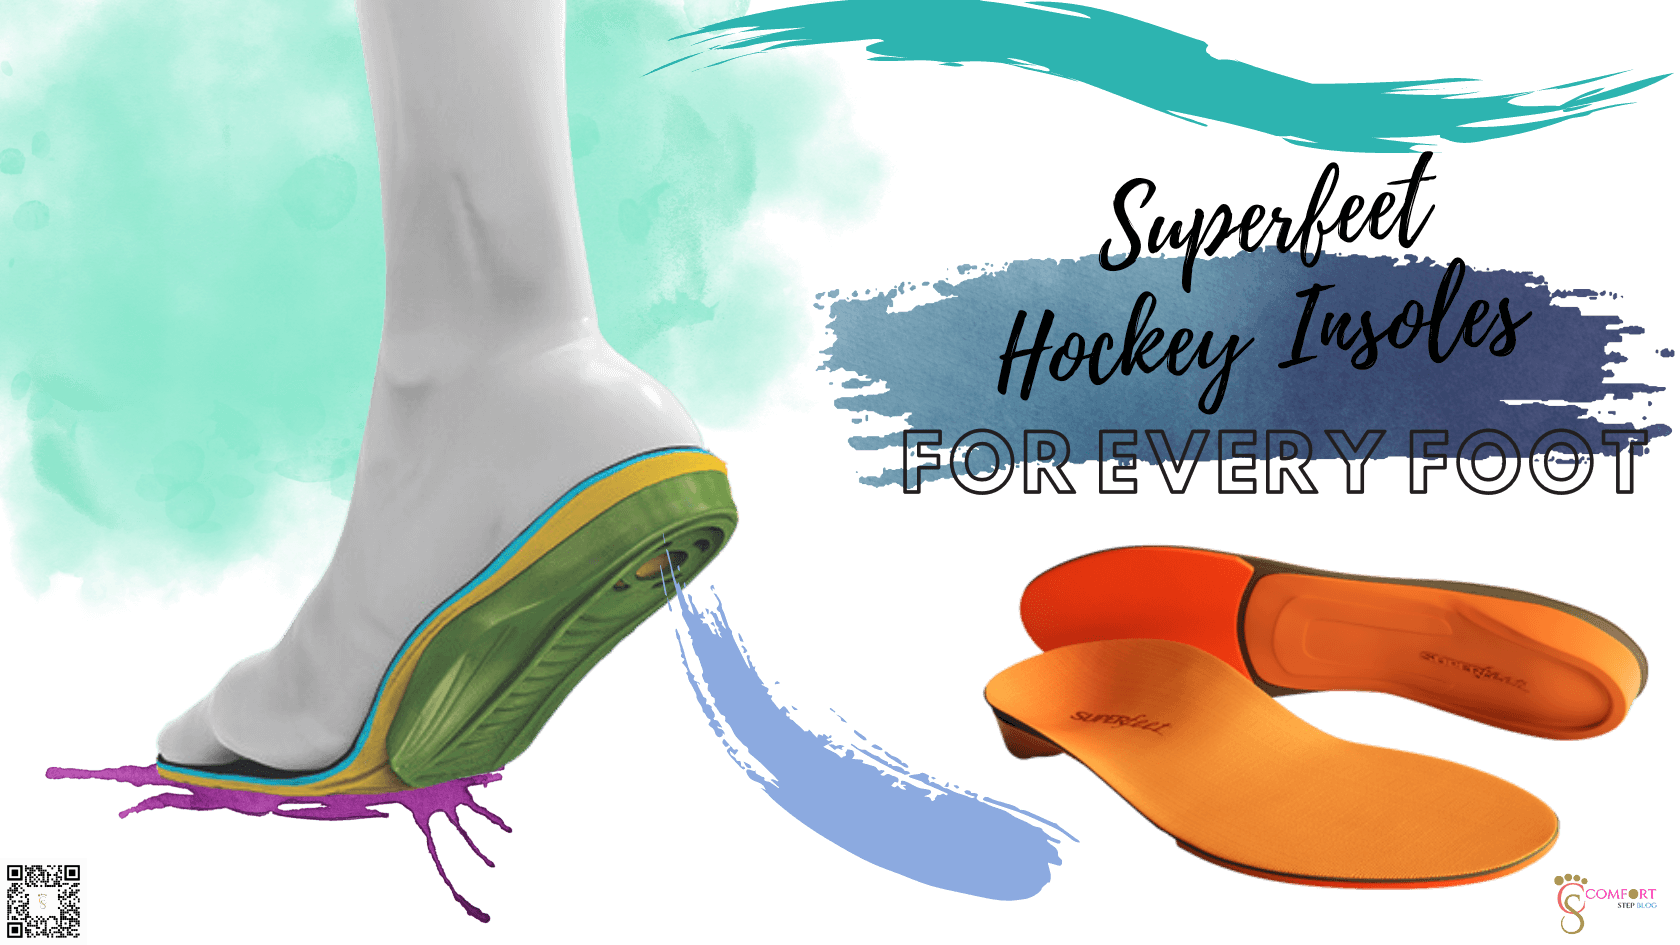 Superfeet Hockey Insoles for Every Foot